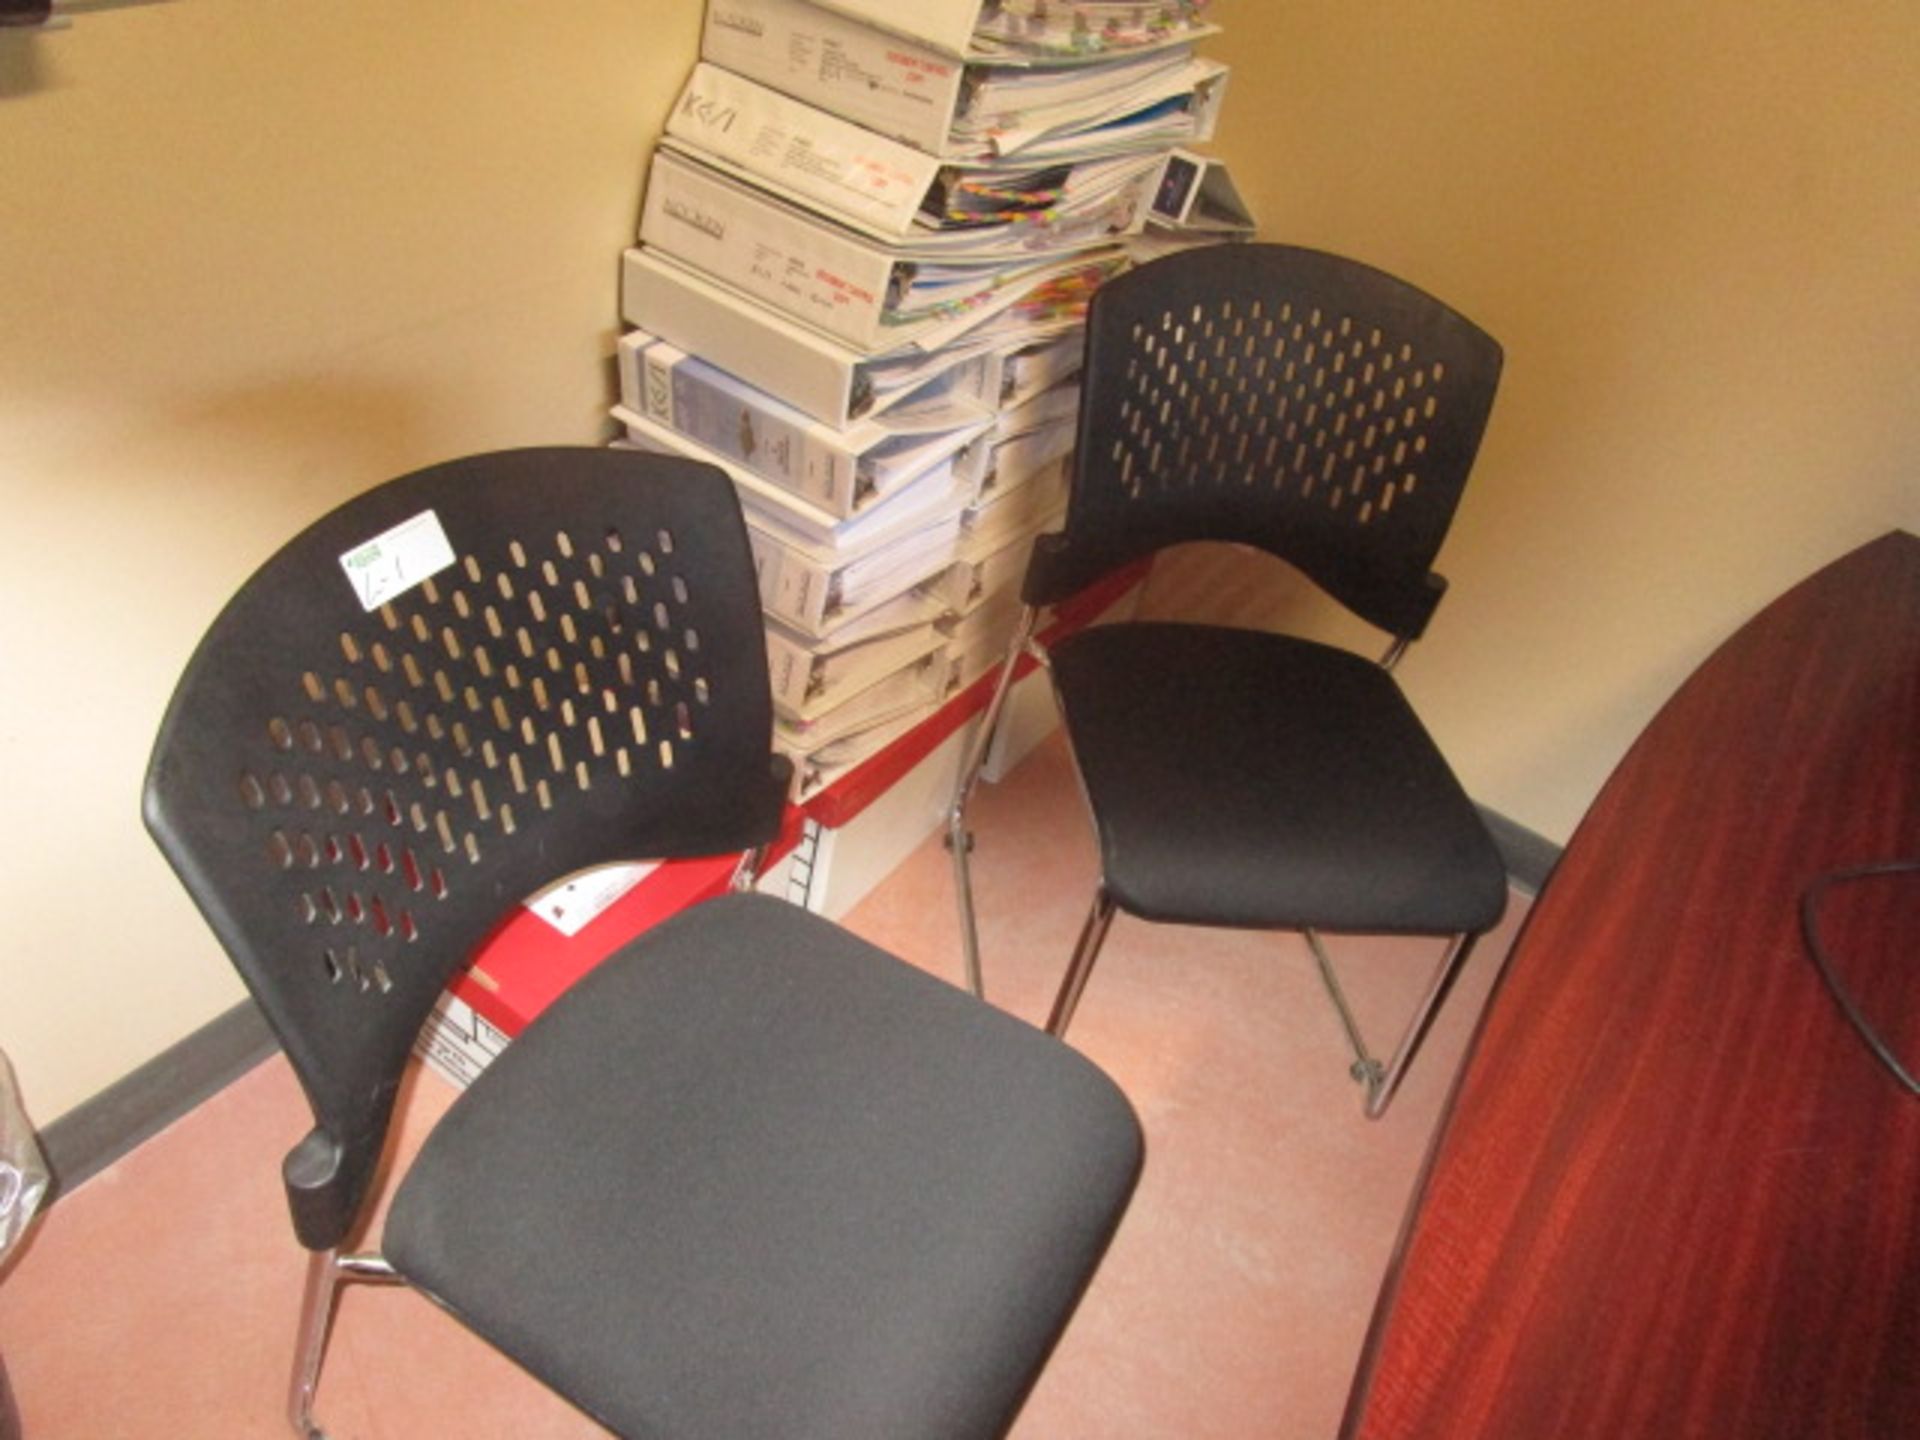 Complete Office Contents - includes Desk with Overshelf, 3 Chairs, 4 Door lateral filing cabinets, - Image 3 of 5